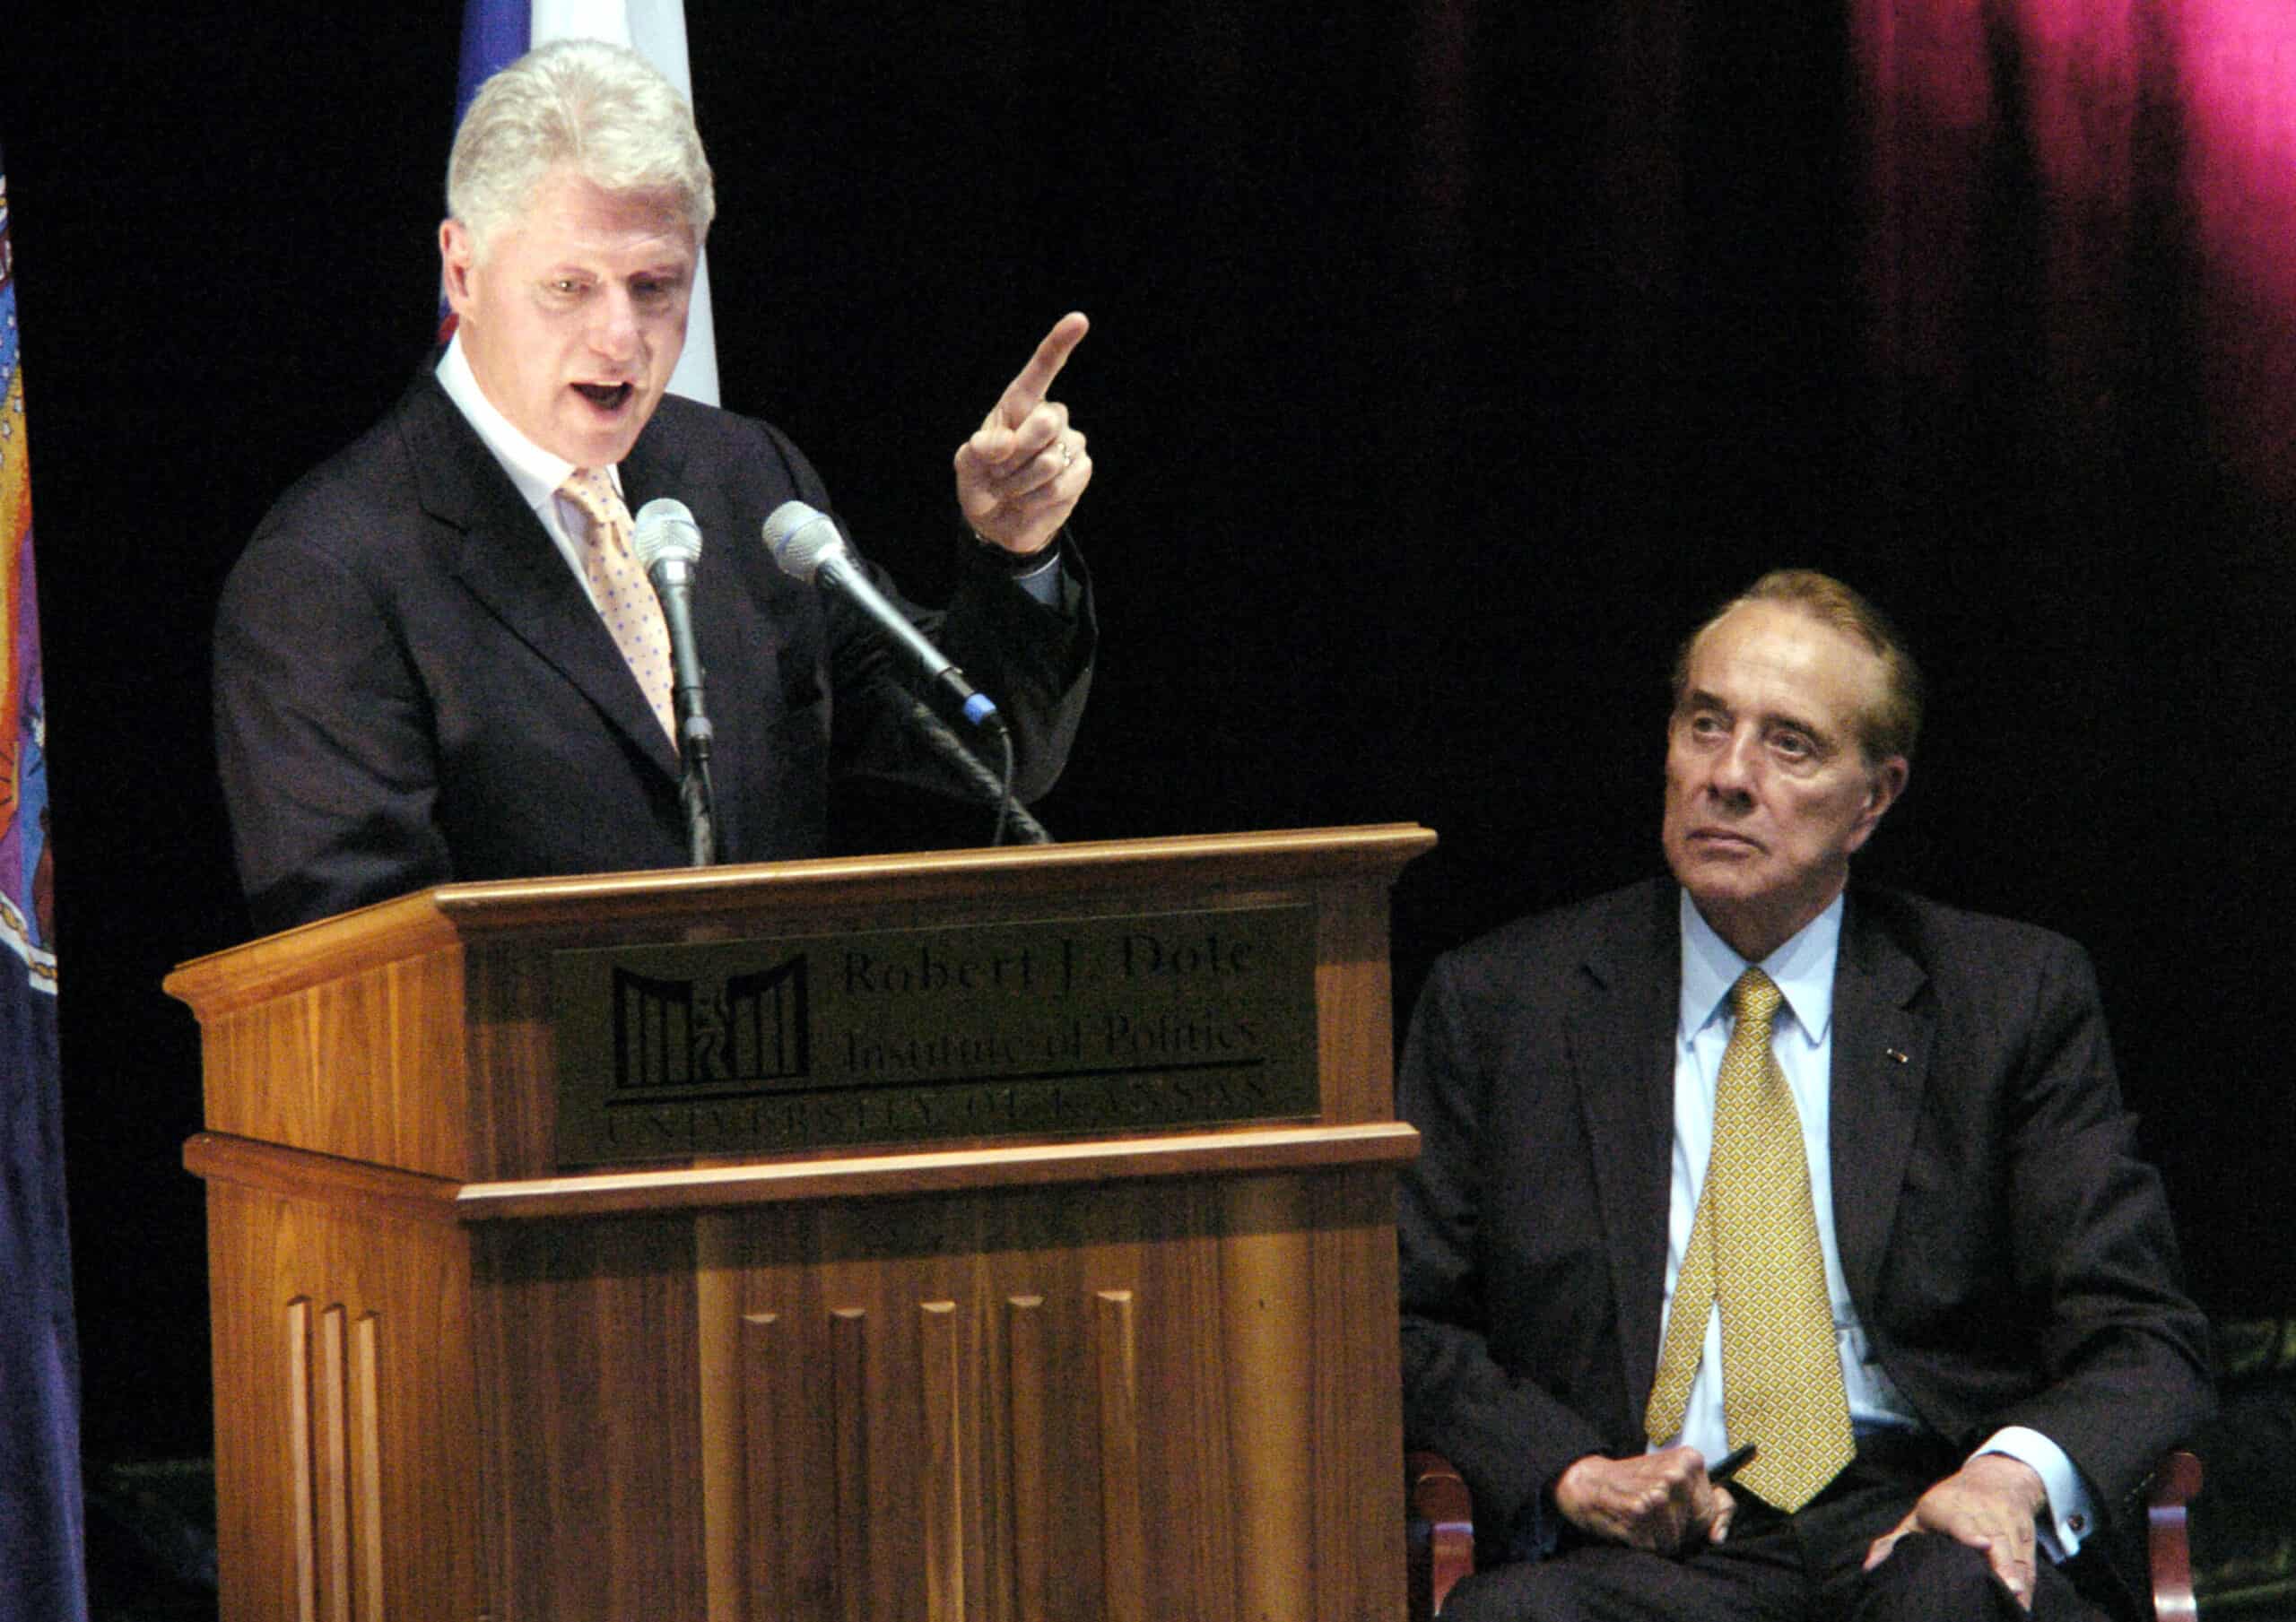 Bill Clinton Gives Inaugural Lecture At Robert J. Dole Institute of Politics